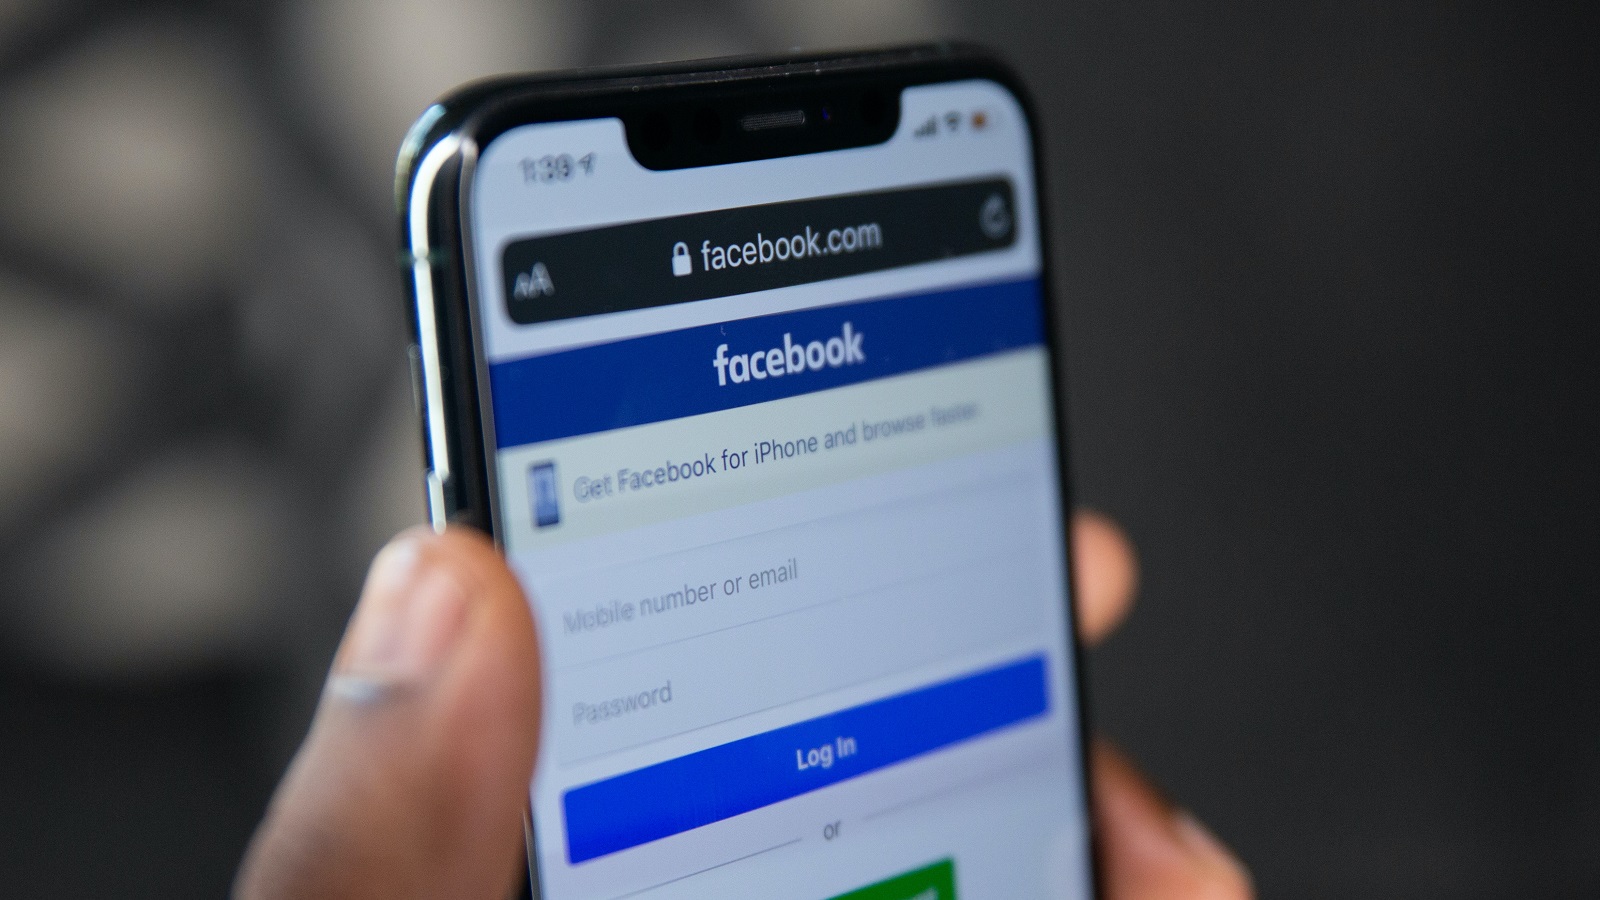 How to check if your phone number was in the Facebook data leak - Memeburn